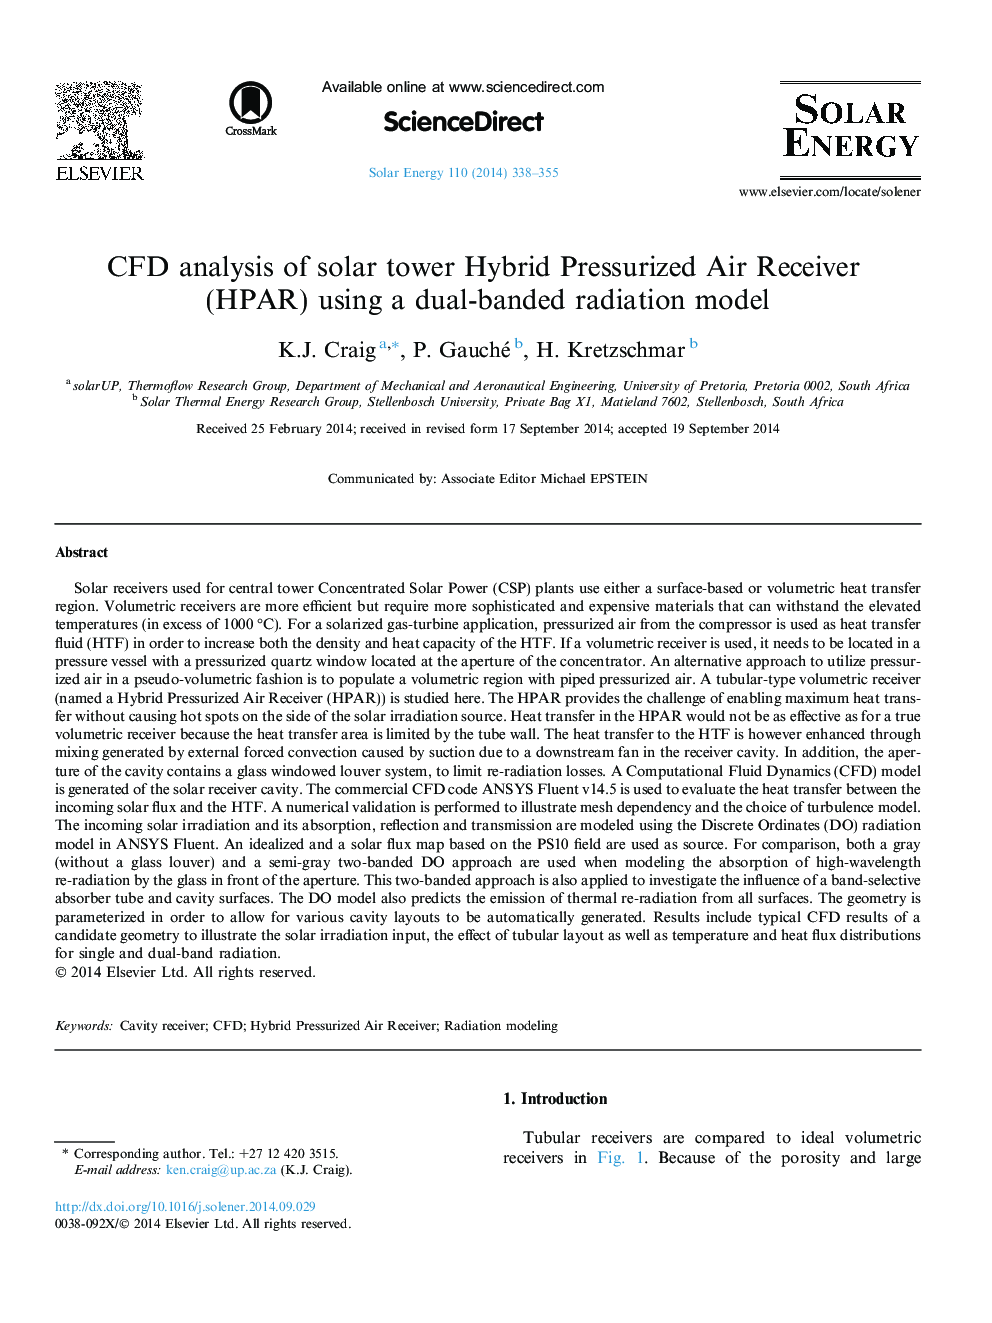 CFD analysis of solar tower Hybrid Pressurized Air Receiver (HPAR) using a dual-banded radiation model